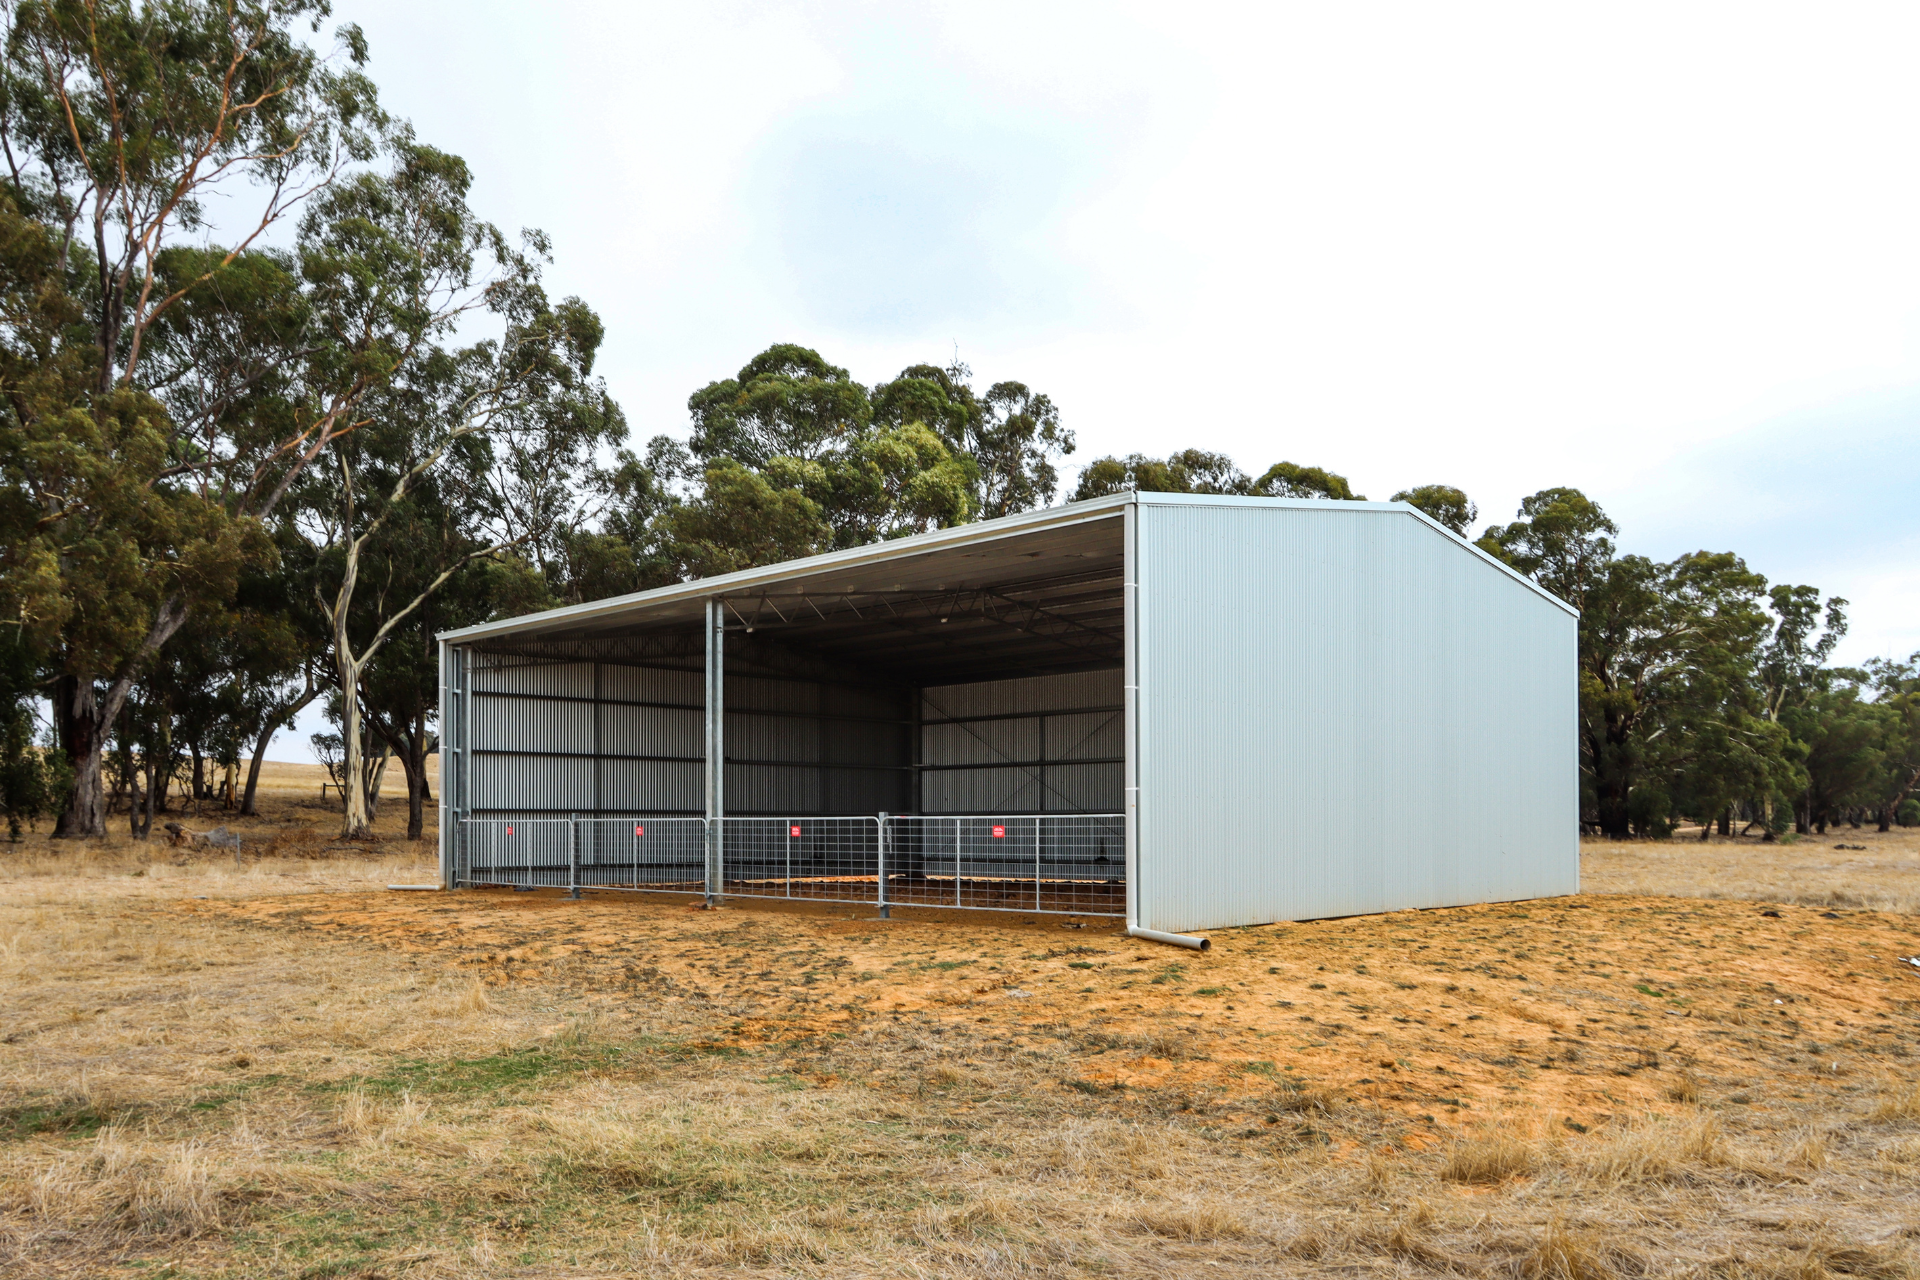 A 15m x 12m x 4.5m hay shed at Barkly VIC